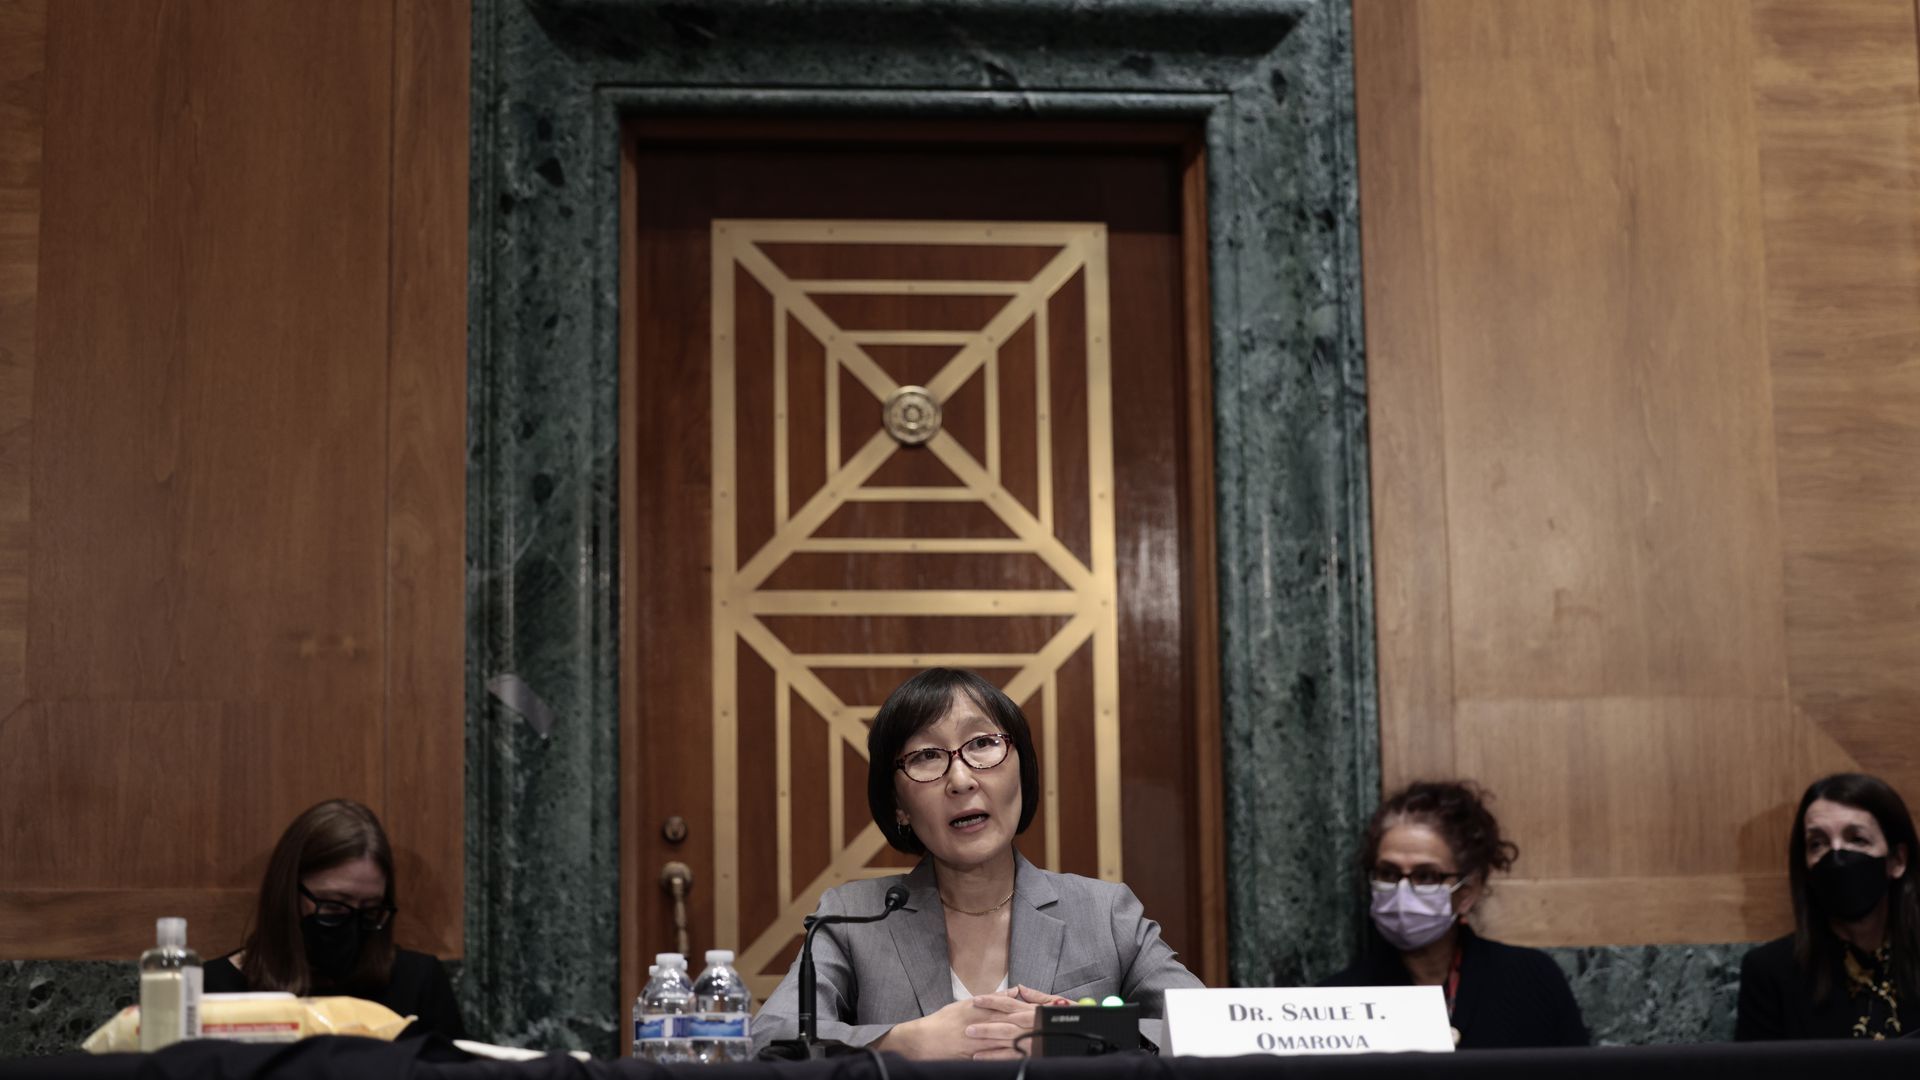 Saule Omarova, nominee for Comptroller of the Currency, at a confirmation hearing on Nov. 18.